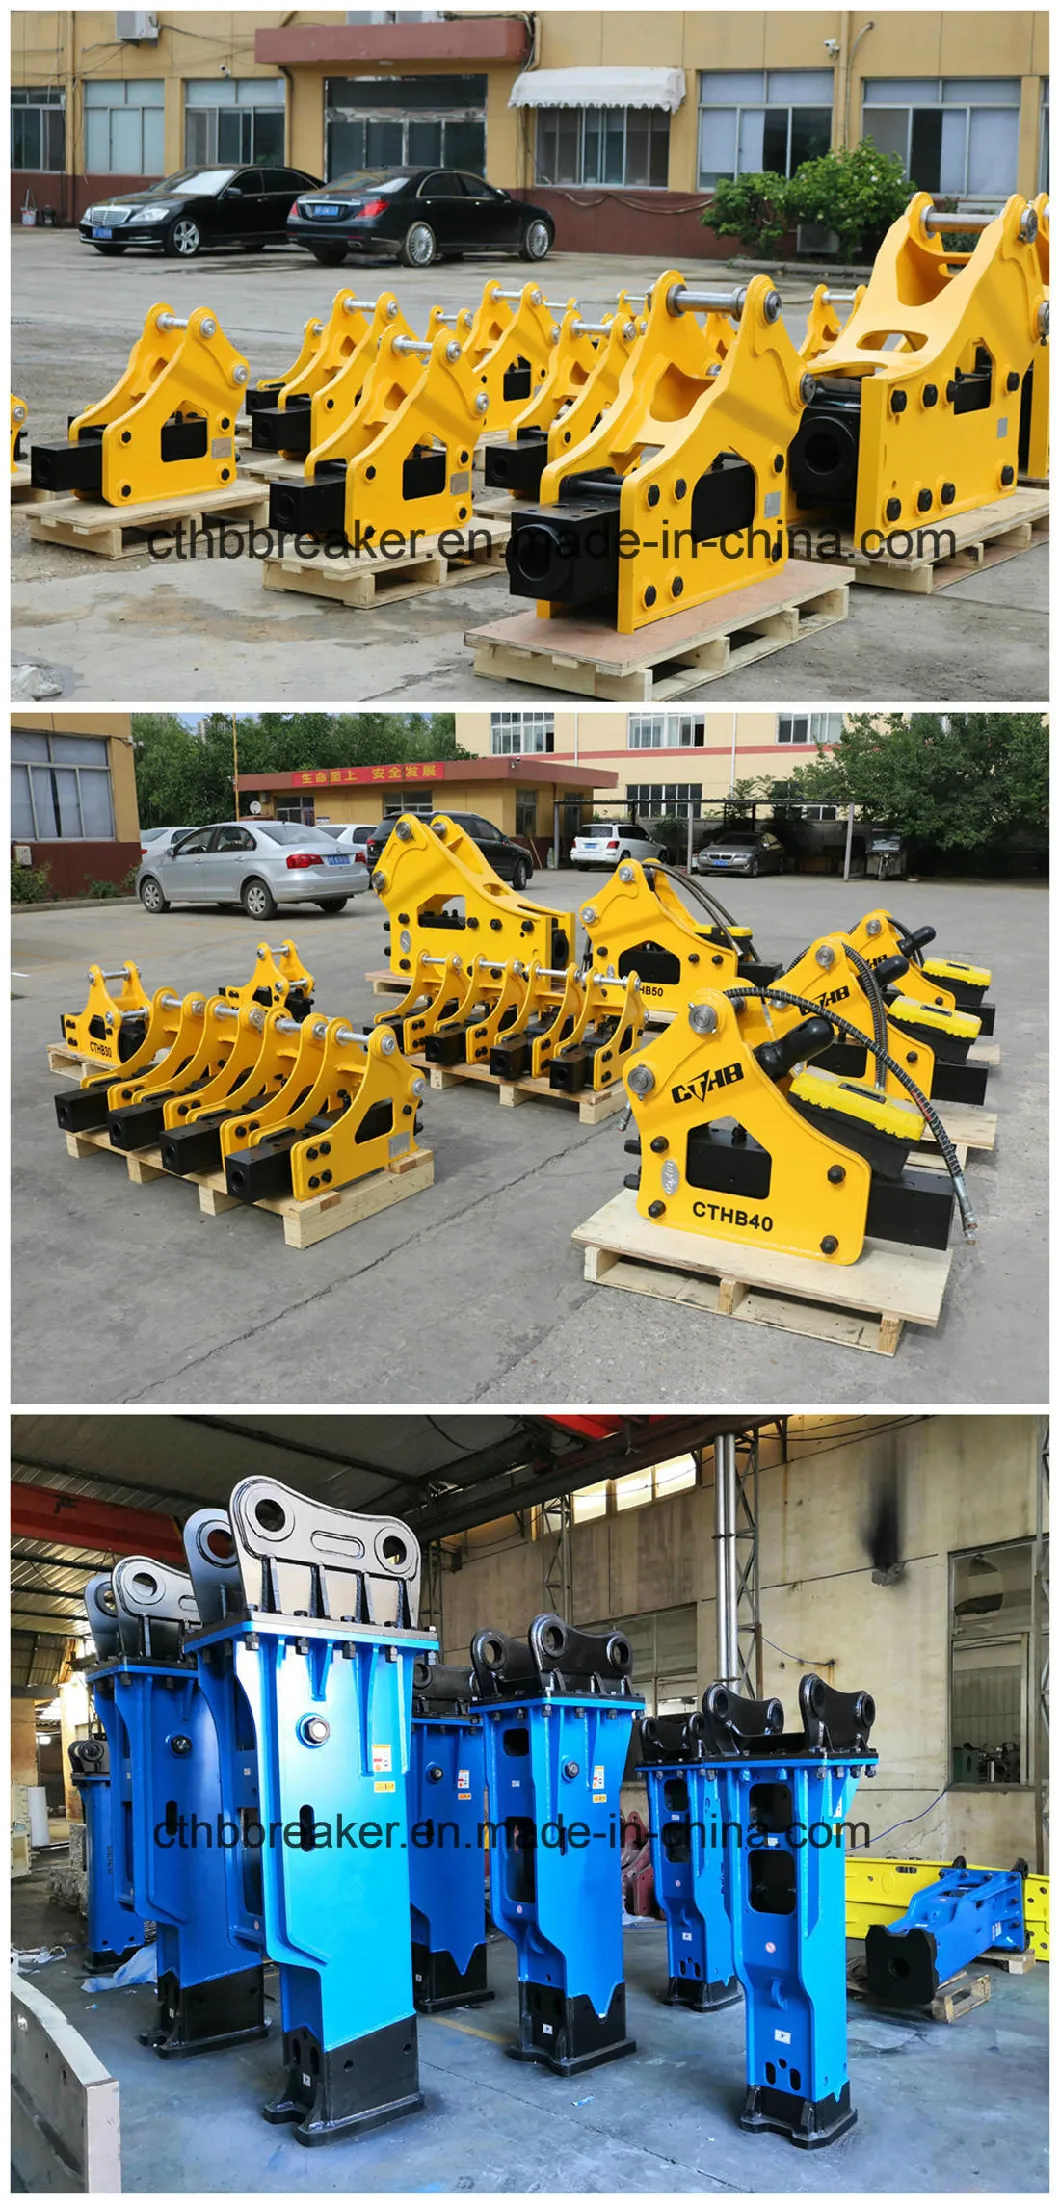 Hydraulic Hammers for Demolition of Rock, Concrete and Other Materials in Aggregate